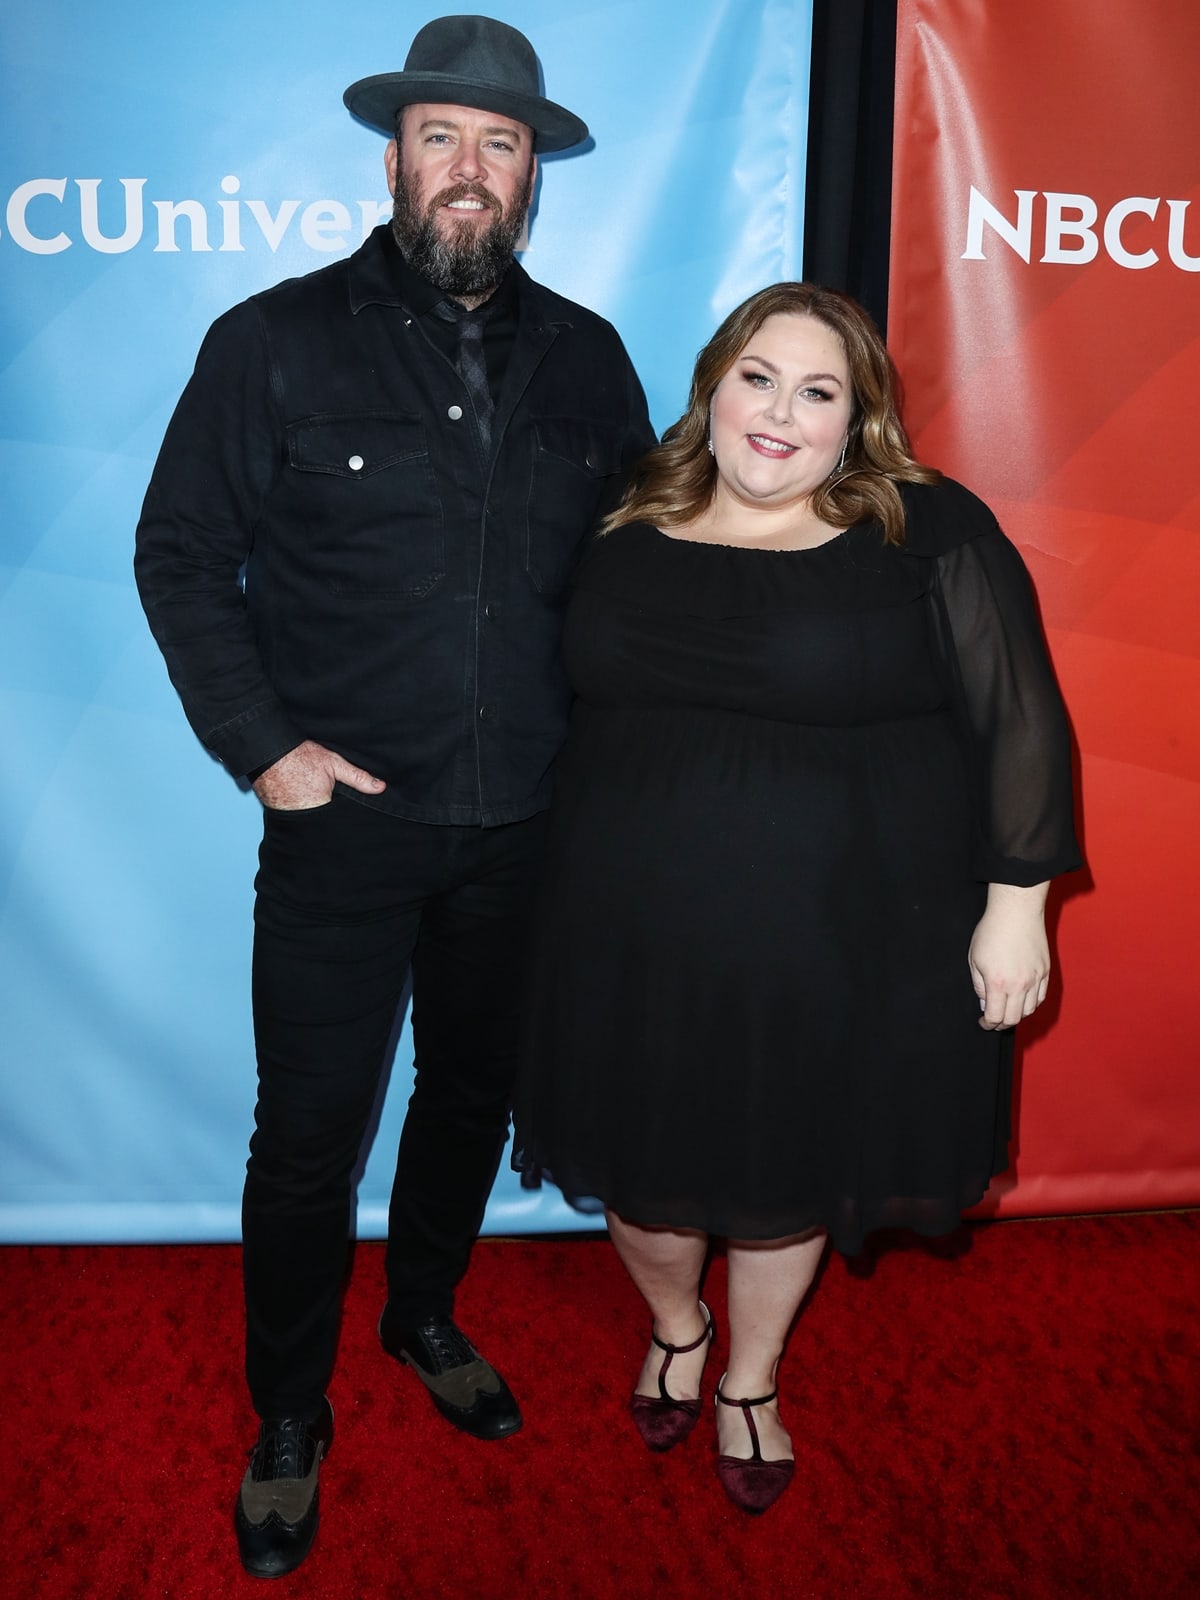 Chris Sullivan and Chrissy Metz are co-stars on the NBC drama series This Is Us, where they play husband and wife